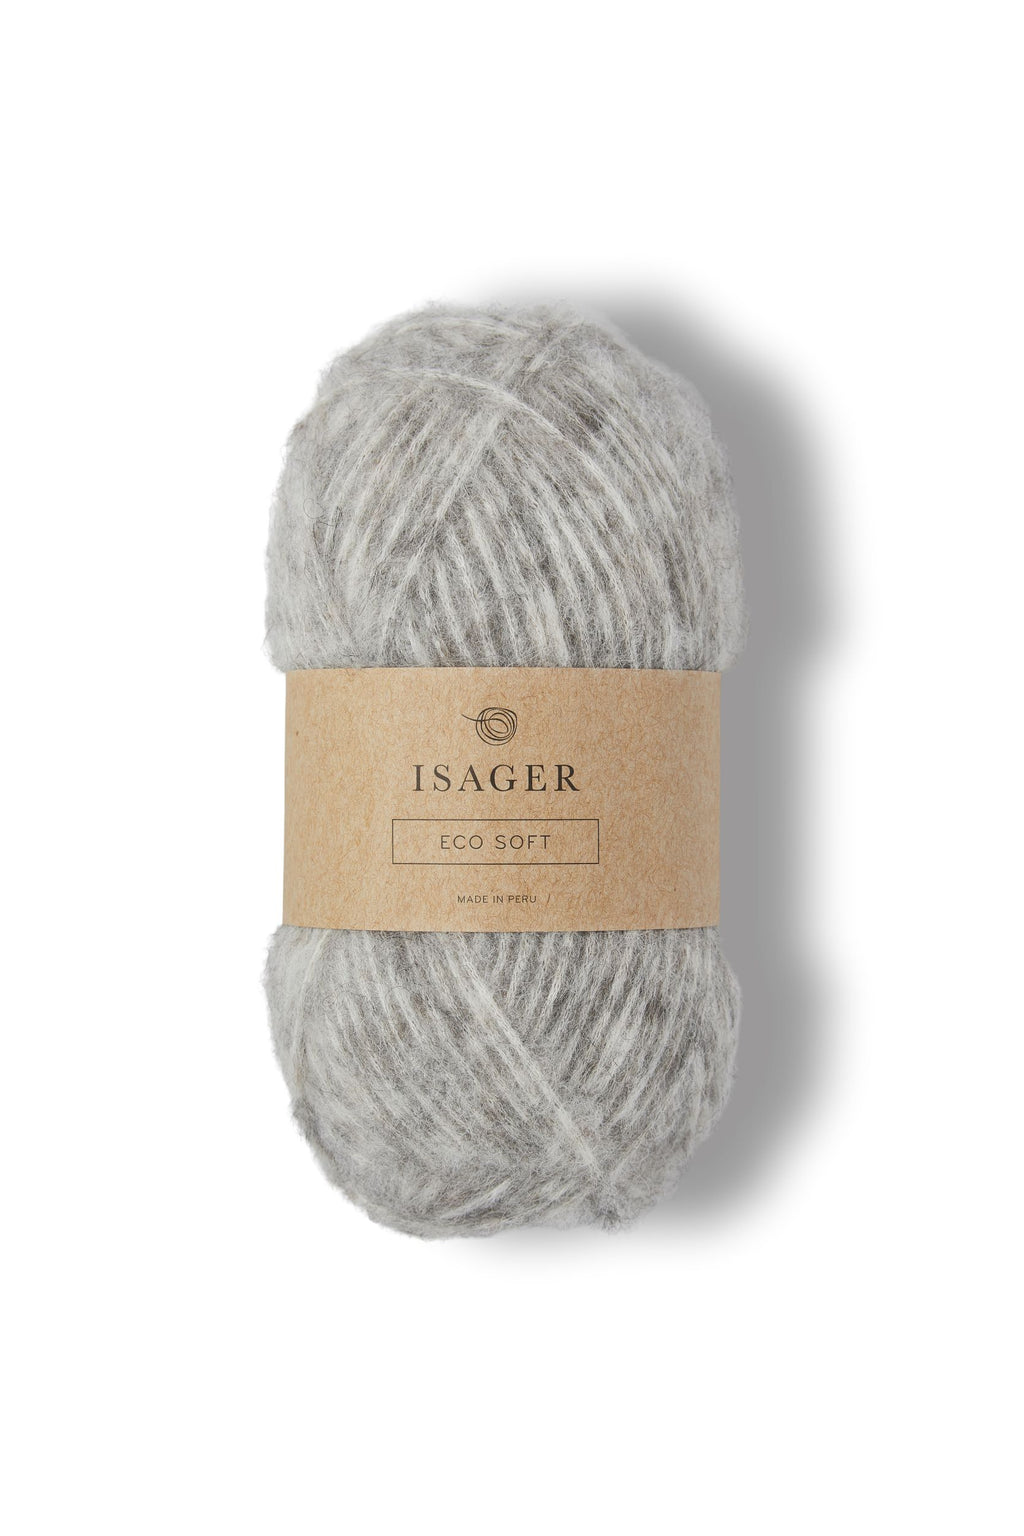 Isager ECO Soft 2s